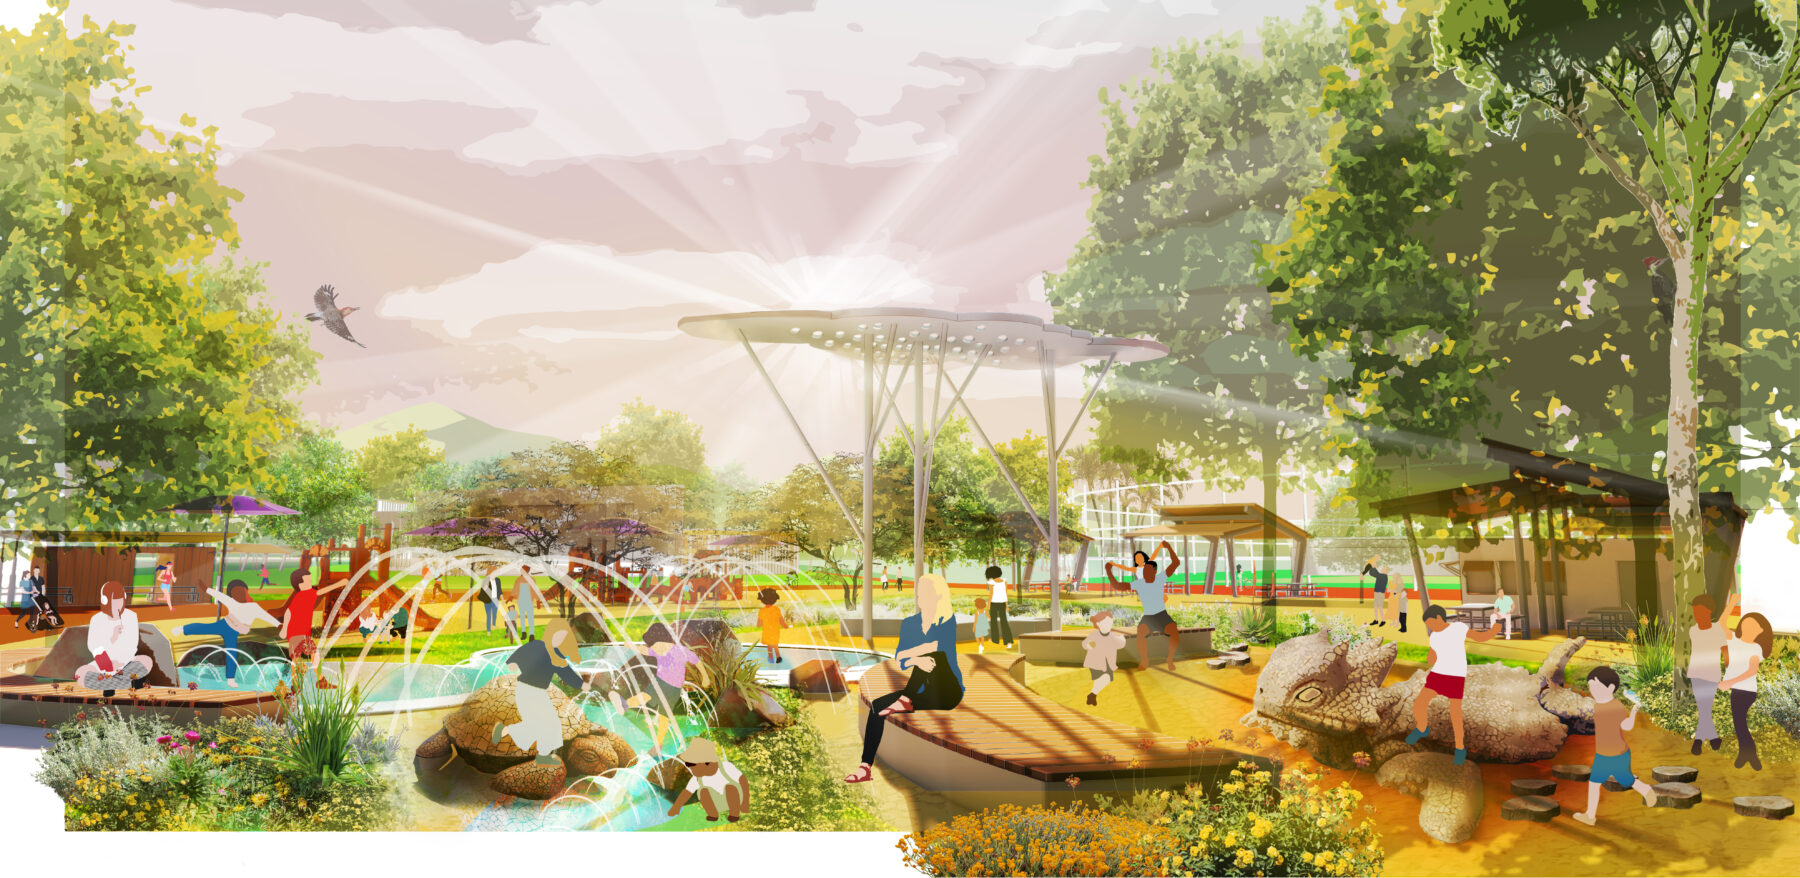 Illustration of new expanded central playground with local flora and fauna, water features and tree canopy